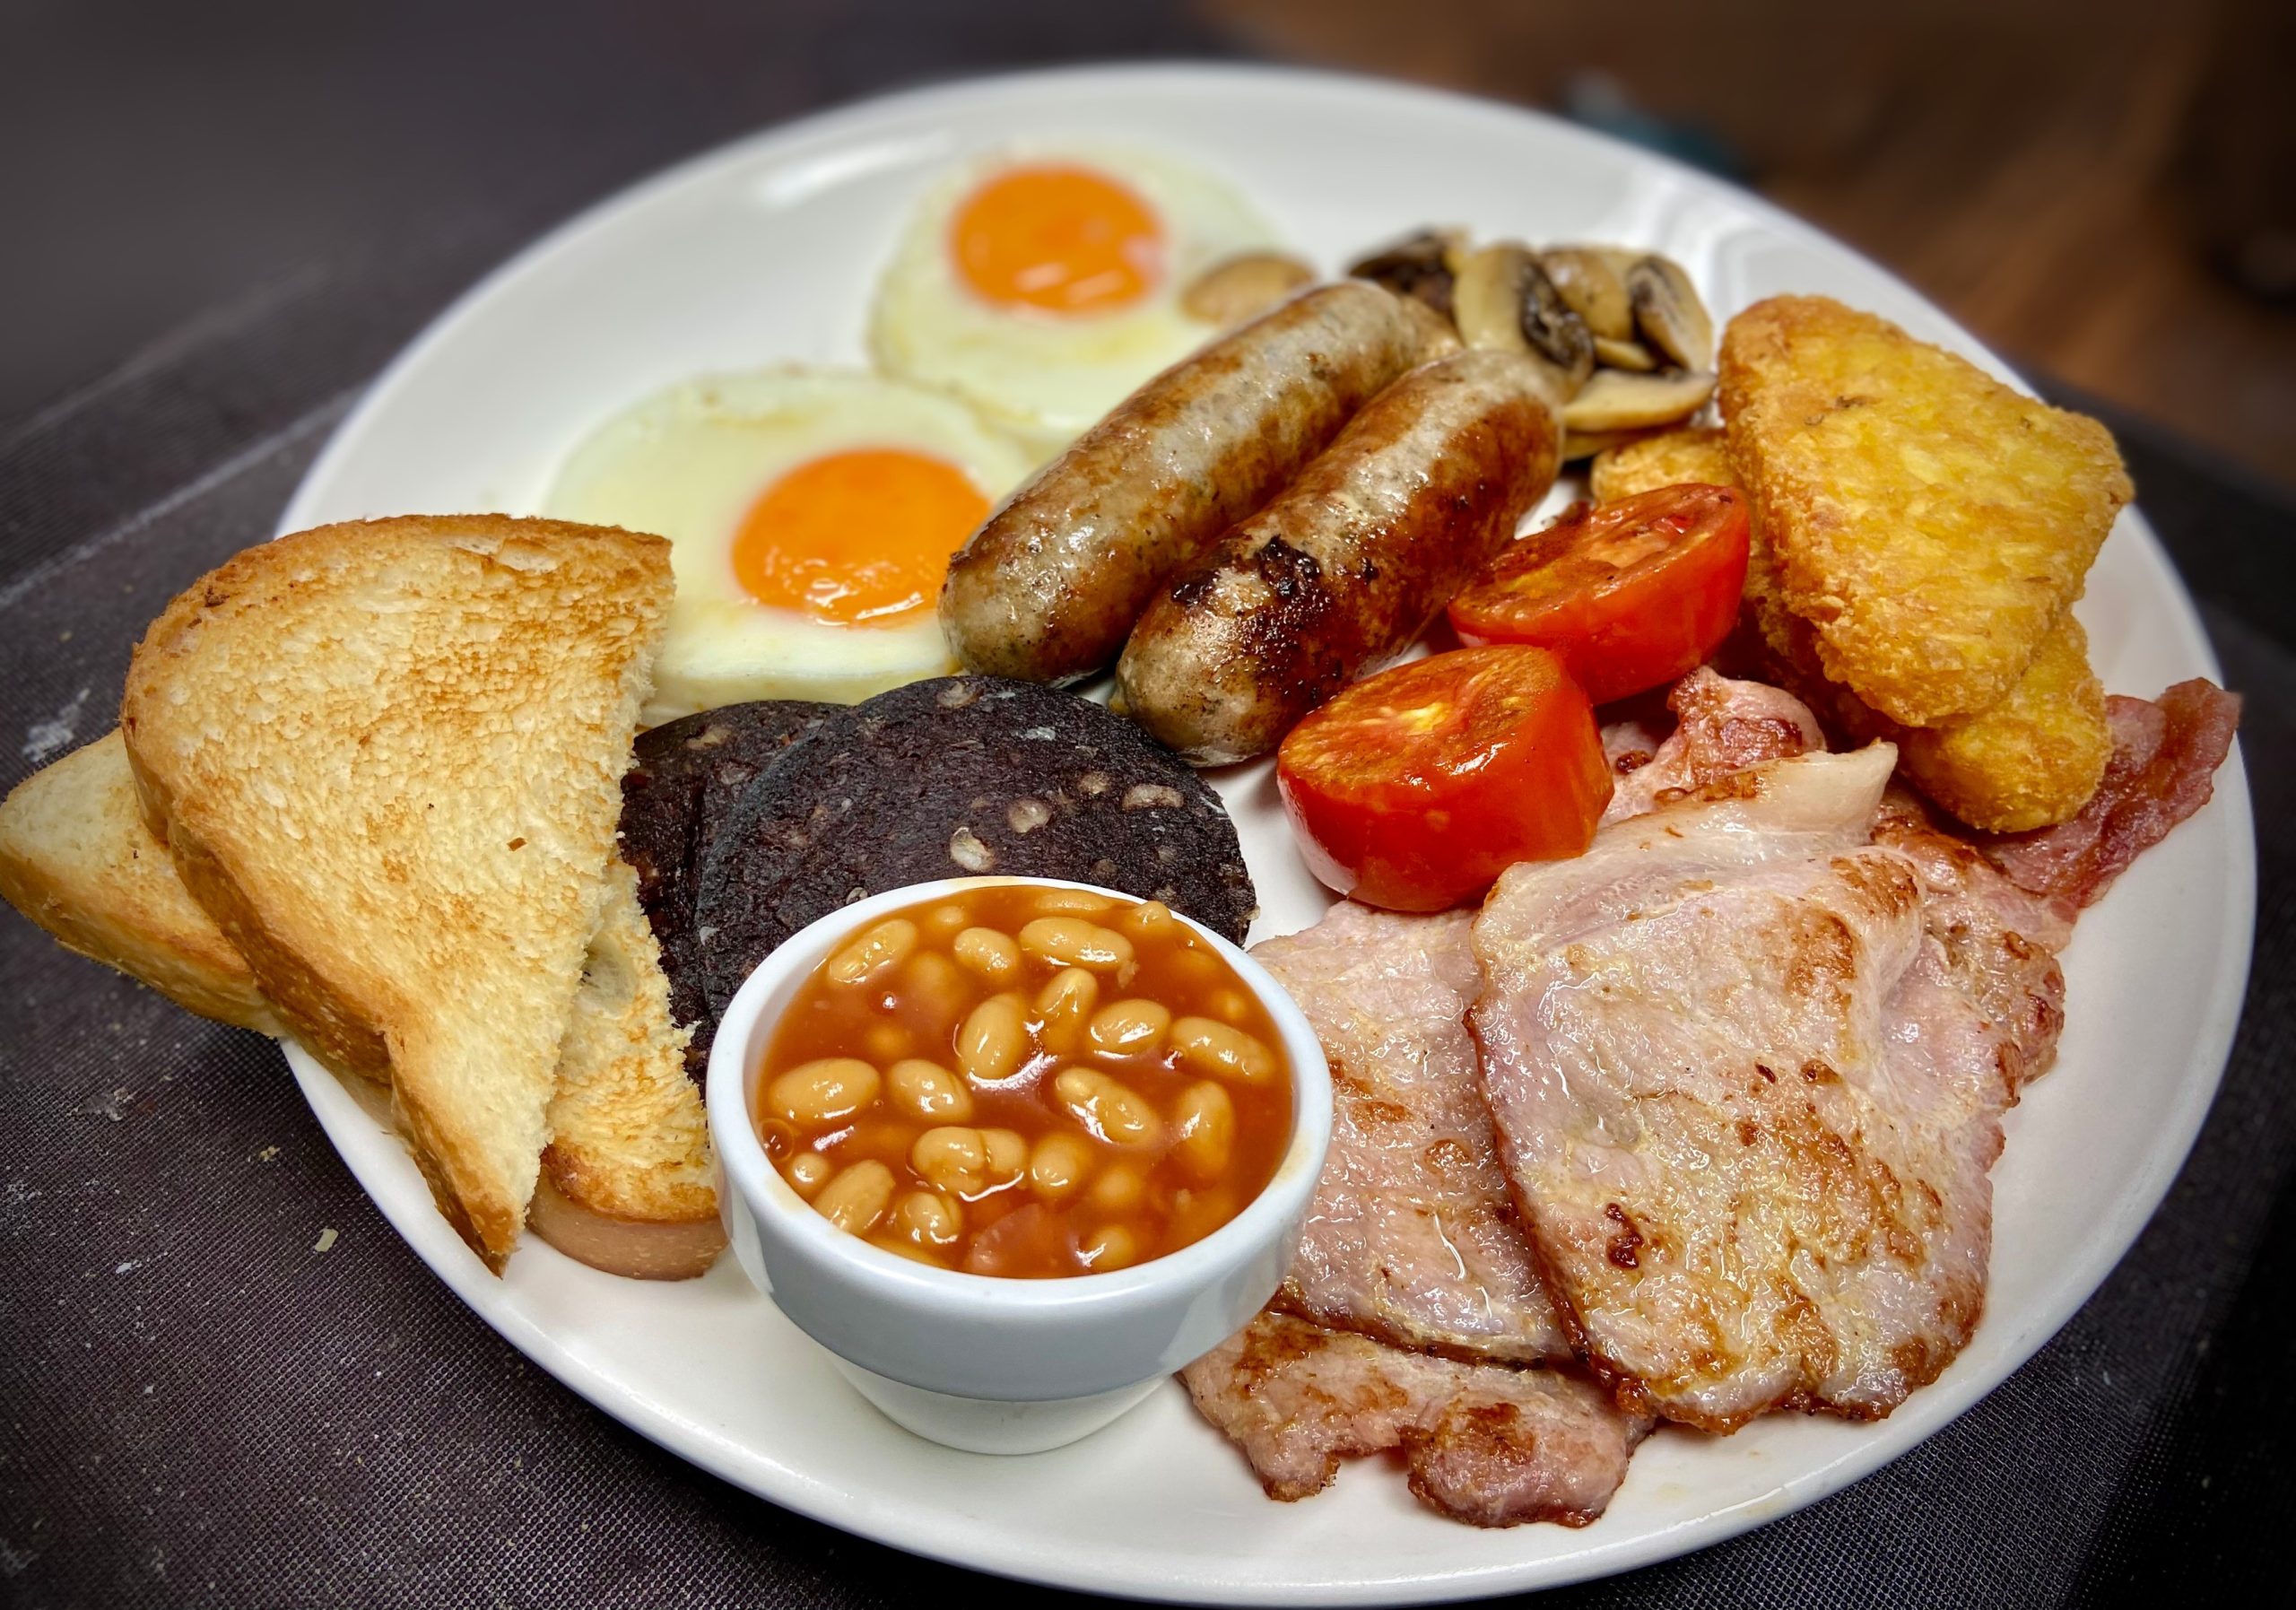 www.znewsservice.com ardent enthusiasts of traditional full english breakfast criticize lacklustre versions served abroad jam press jmp316970 scaled